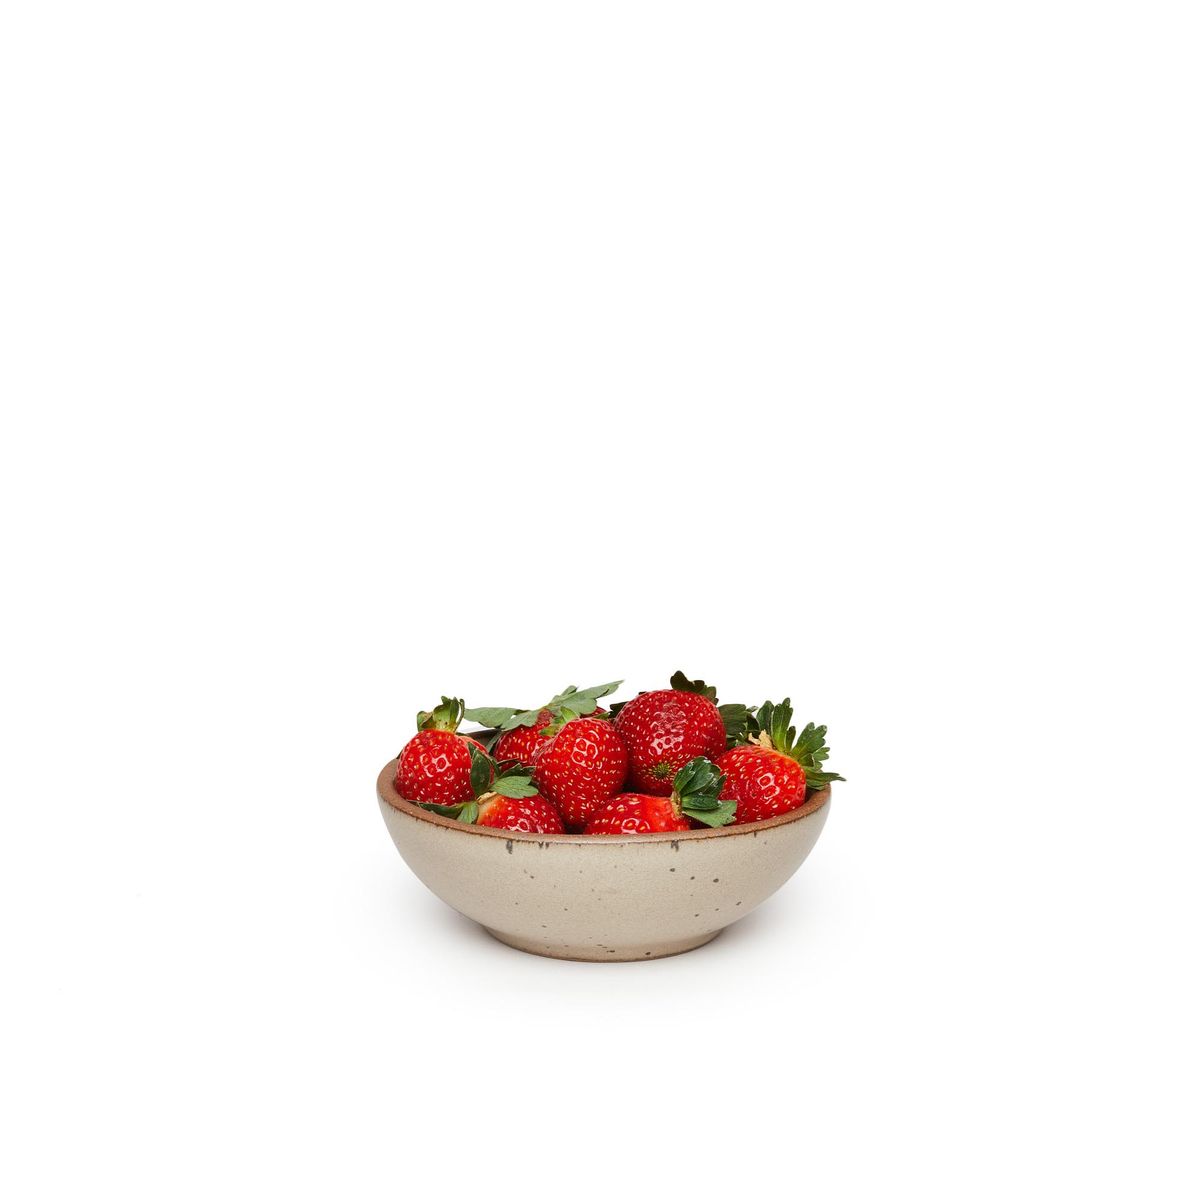 A small shallow ceramic bowl in a warm pale brown color featuring iron speckles and an unglazed rim, filled with strawberries